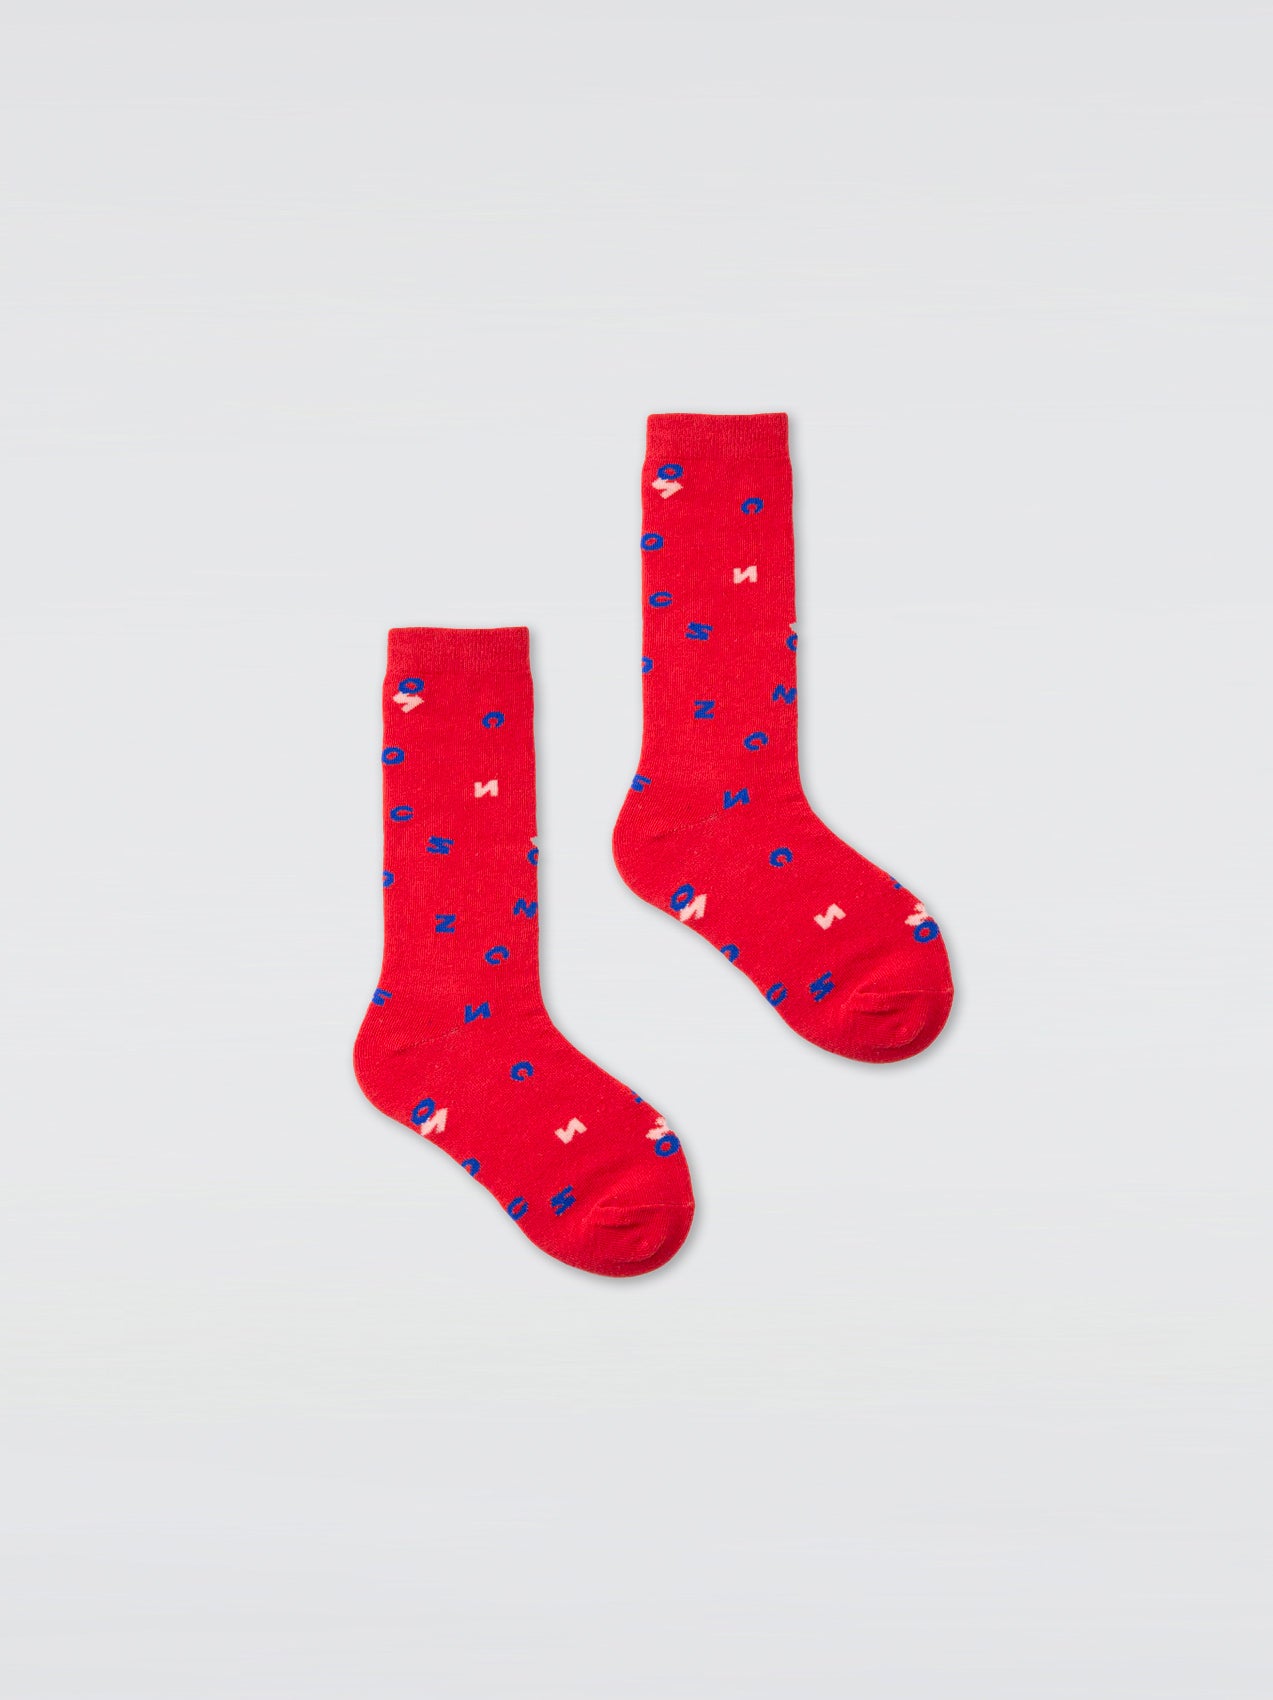 Free Gift Printed Socks (Not Available Separately And Non-Refundable)